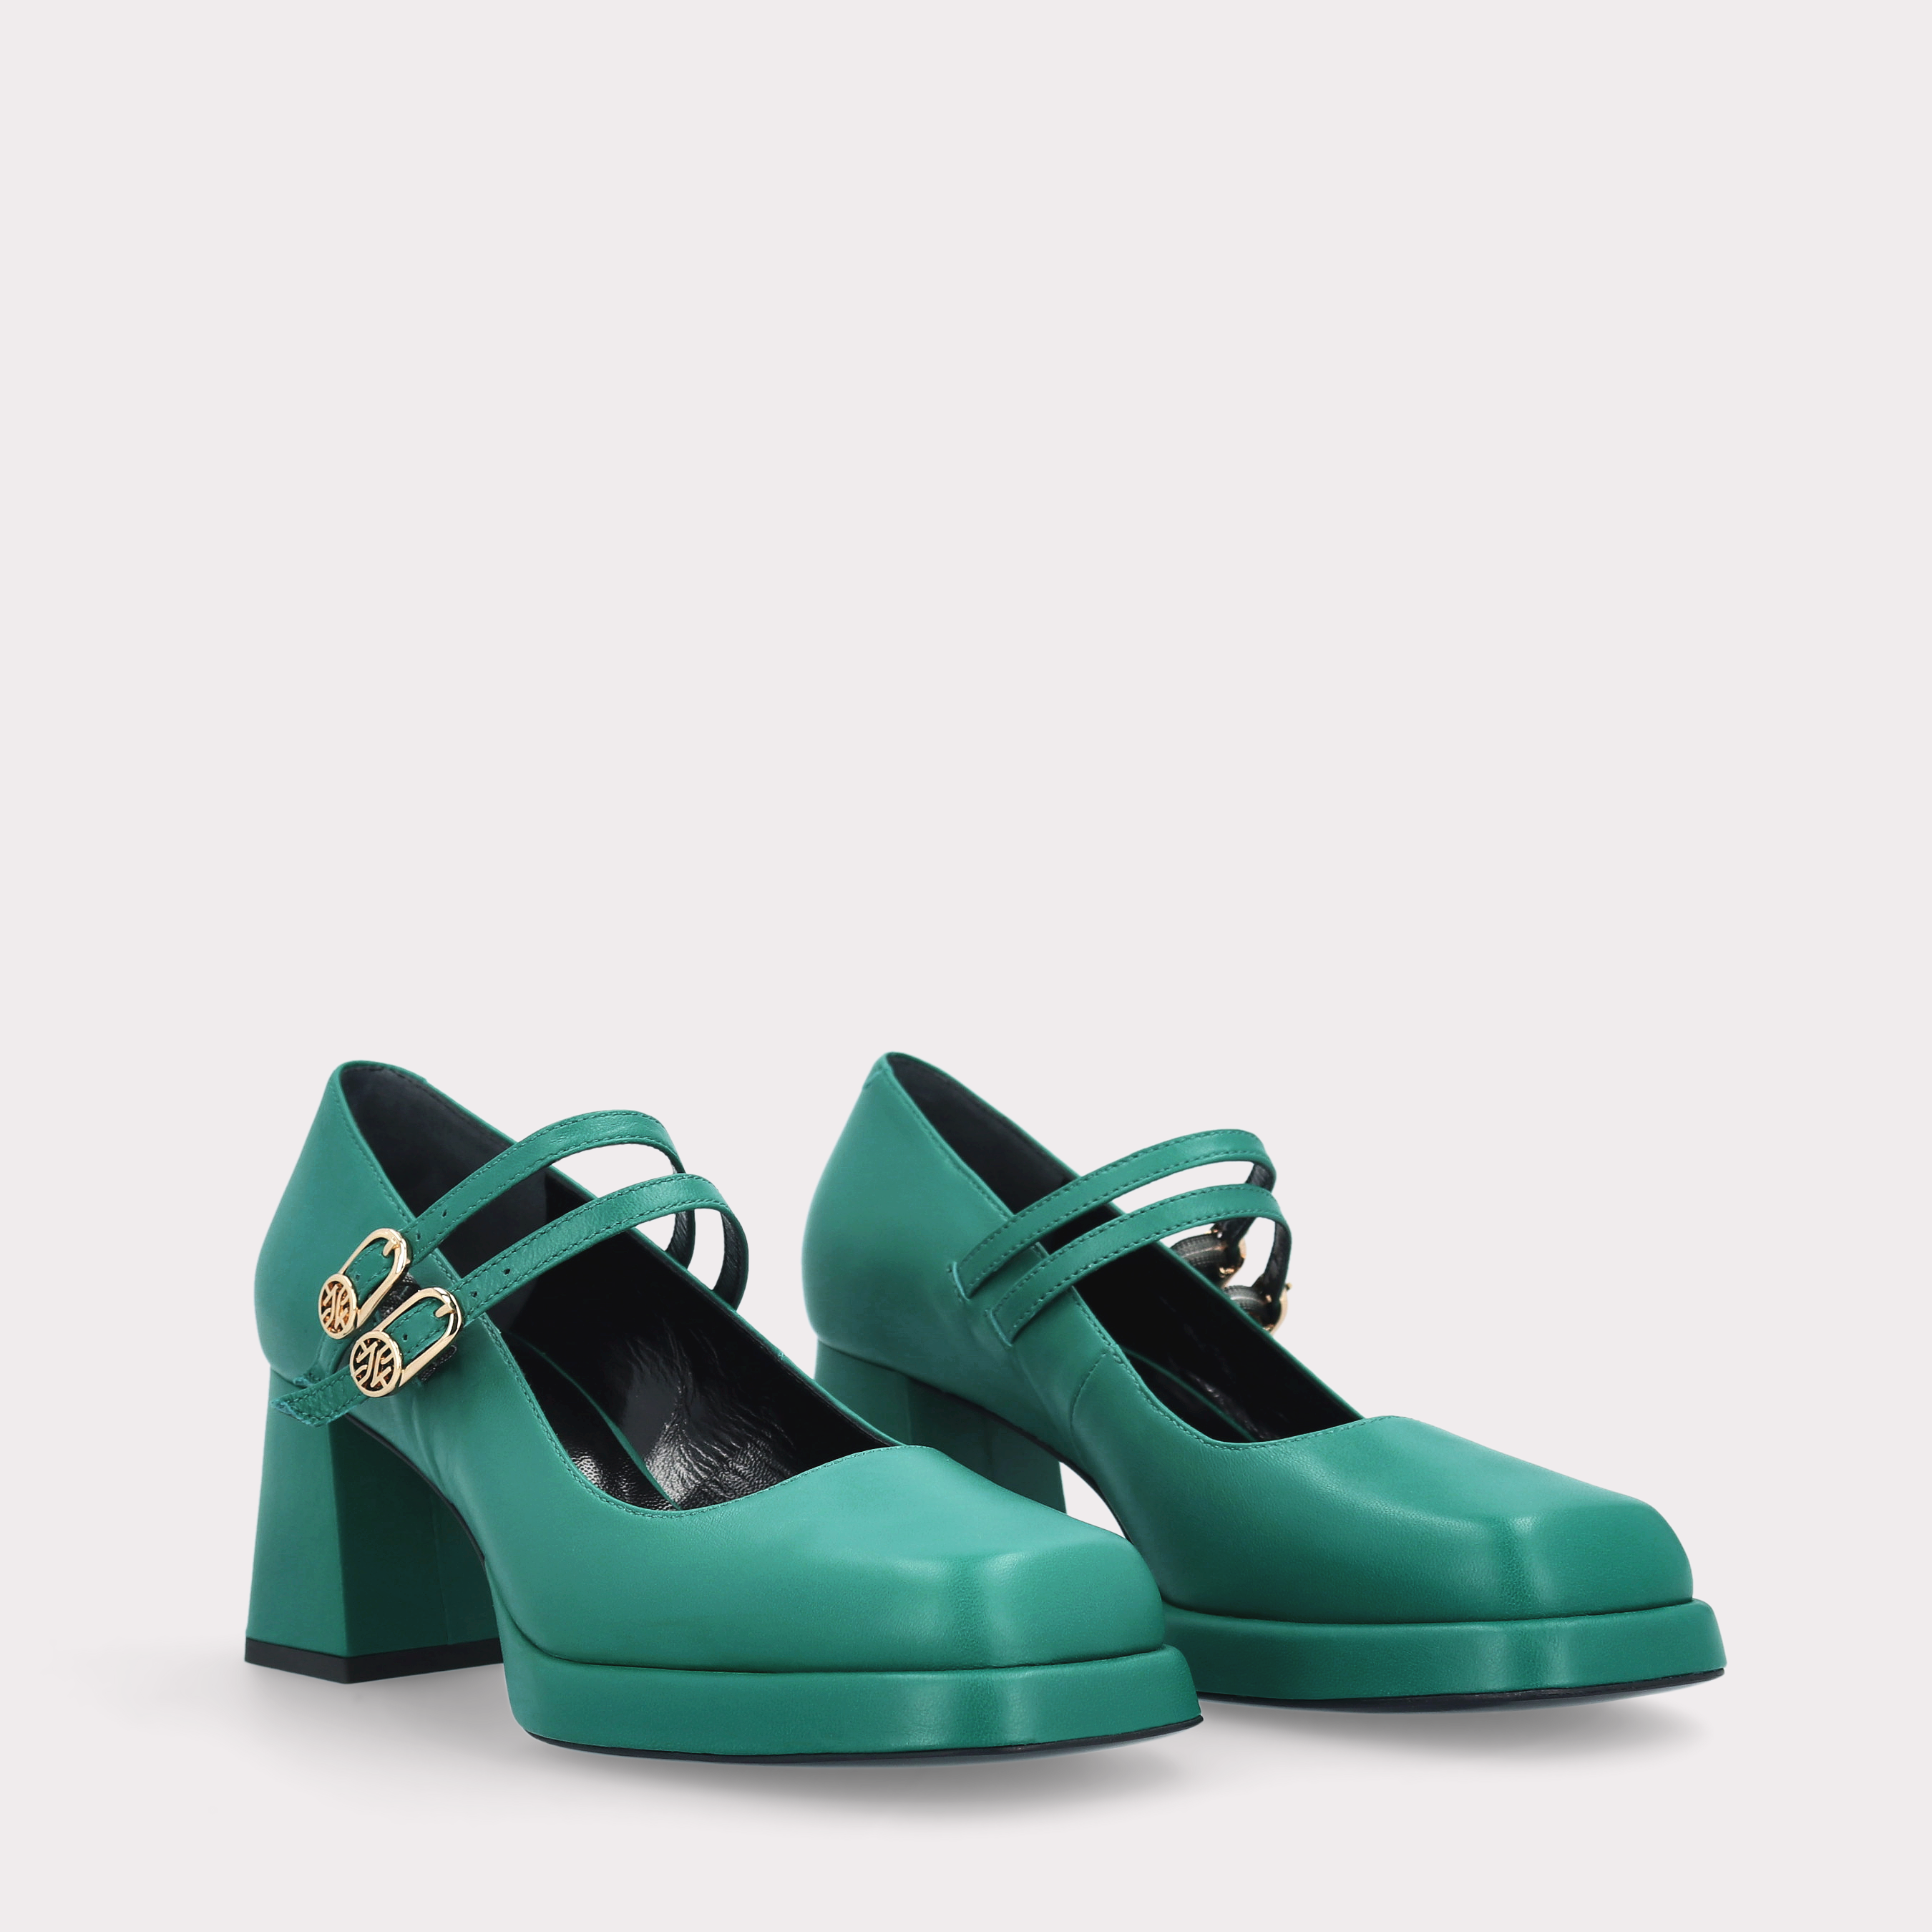 CONNIE BEBE 01 GREEN SMOOTH LEATHER PLATFORM PUMPS